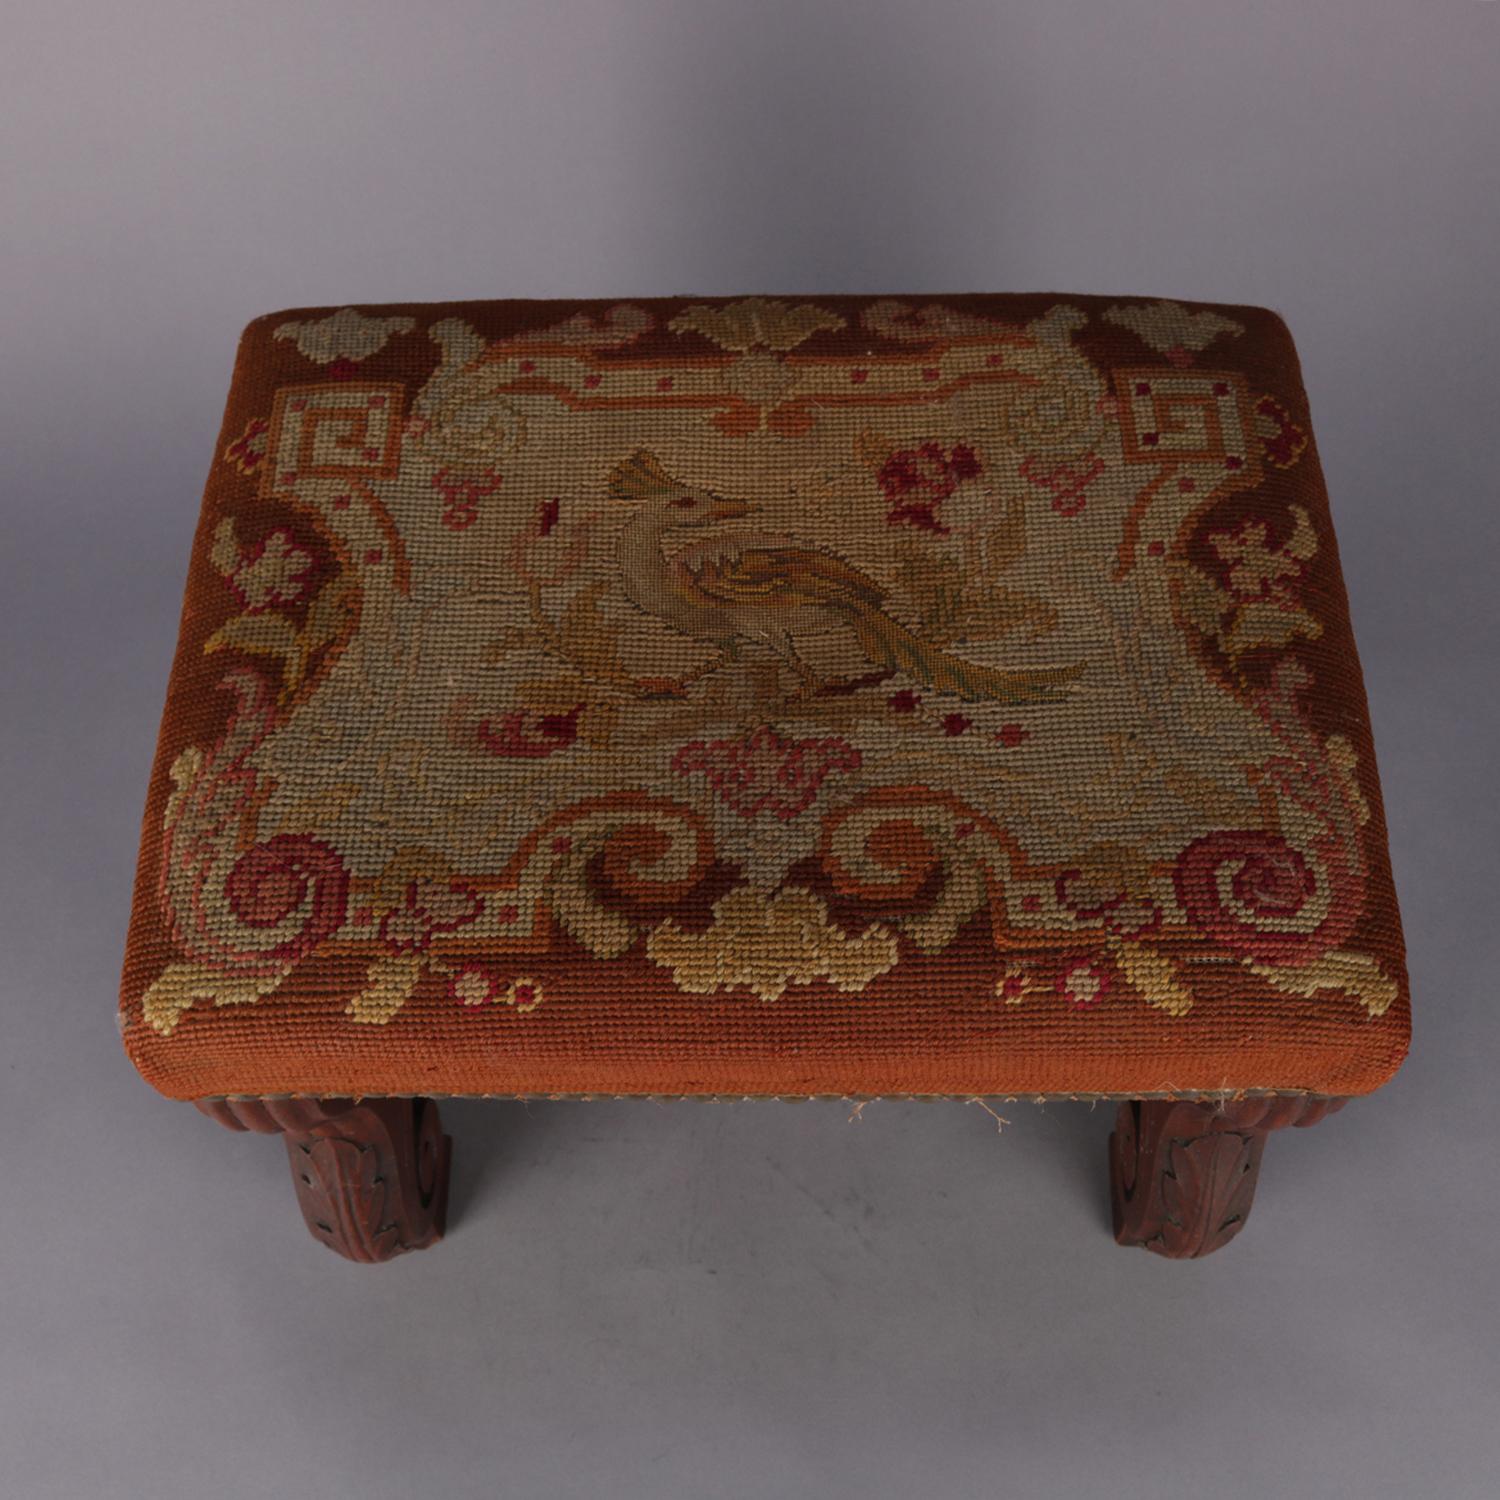 European Antique Continental Carved Walnut and Tapestry Footstool, circa 1850